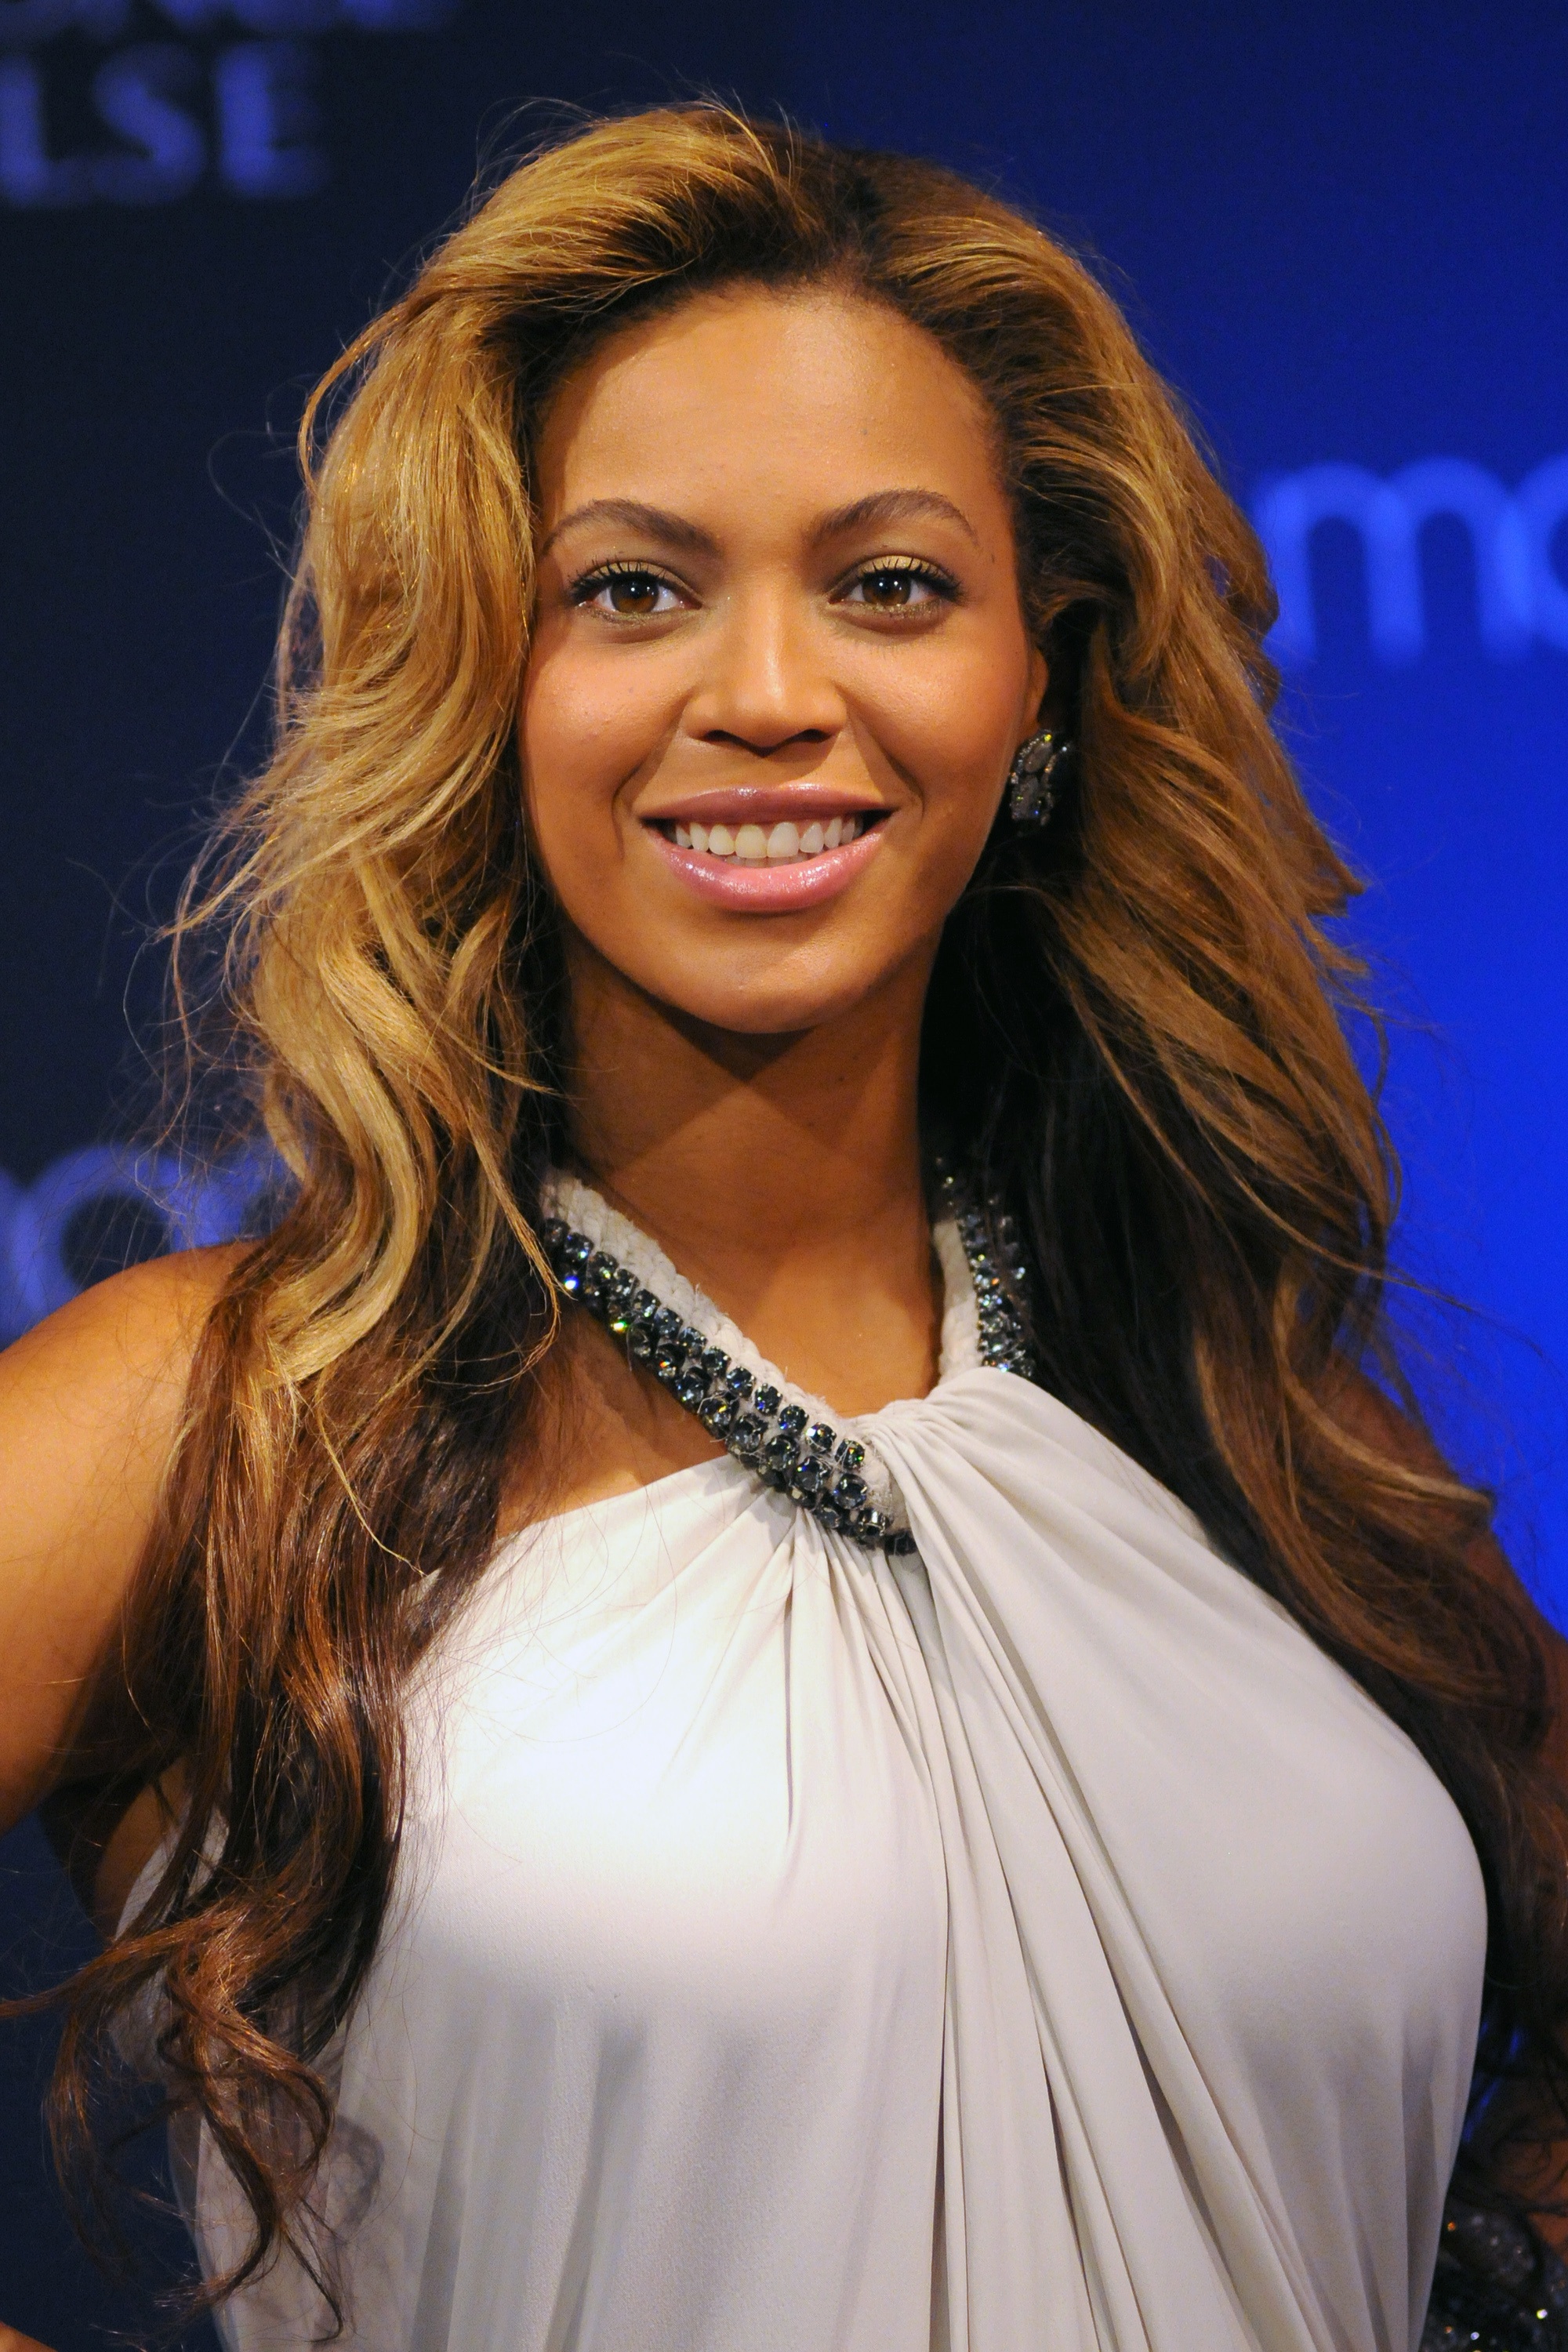 Beyonce Knowles photo 3709 of 6637 pics, wallpaper - photo #656344 - ThePlace22000 x 3000